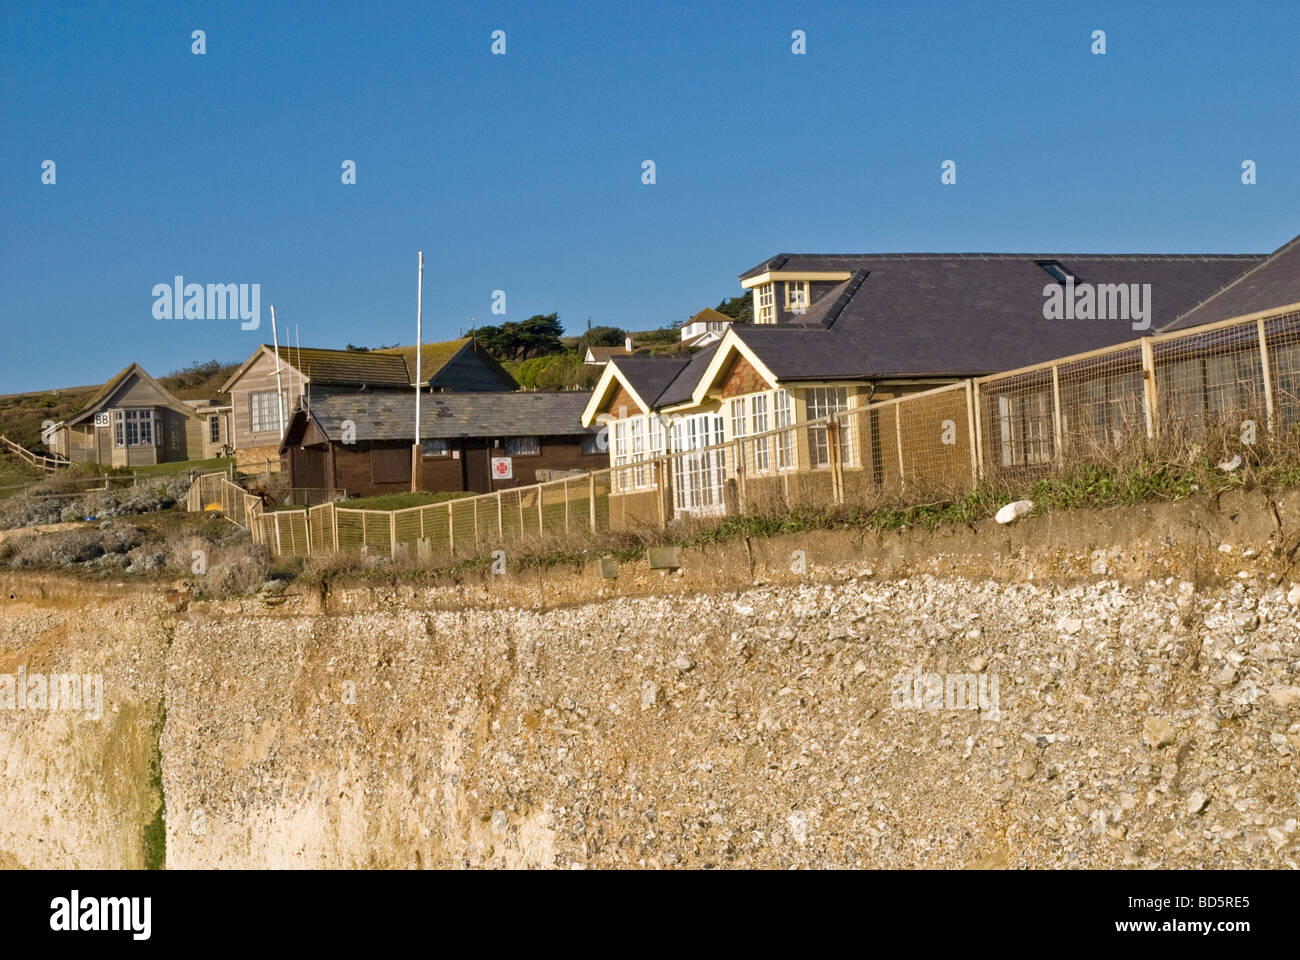 THE HOUSES ON THE EDGE OF HILL IN A DANGER OF LANDSLIDE Stock Photo